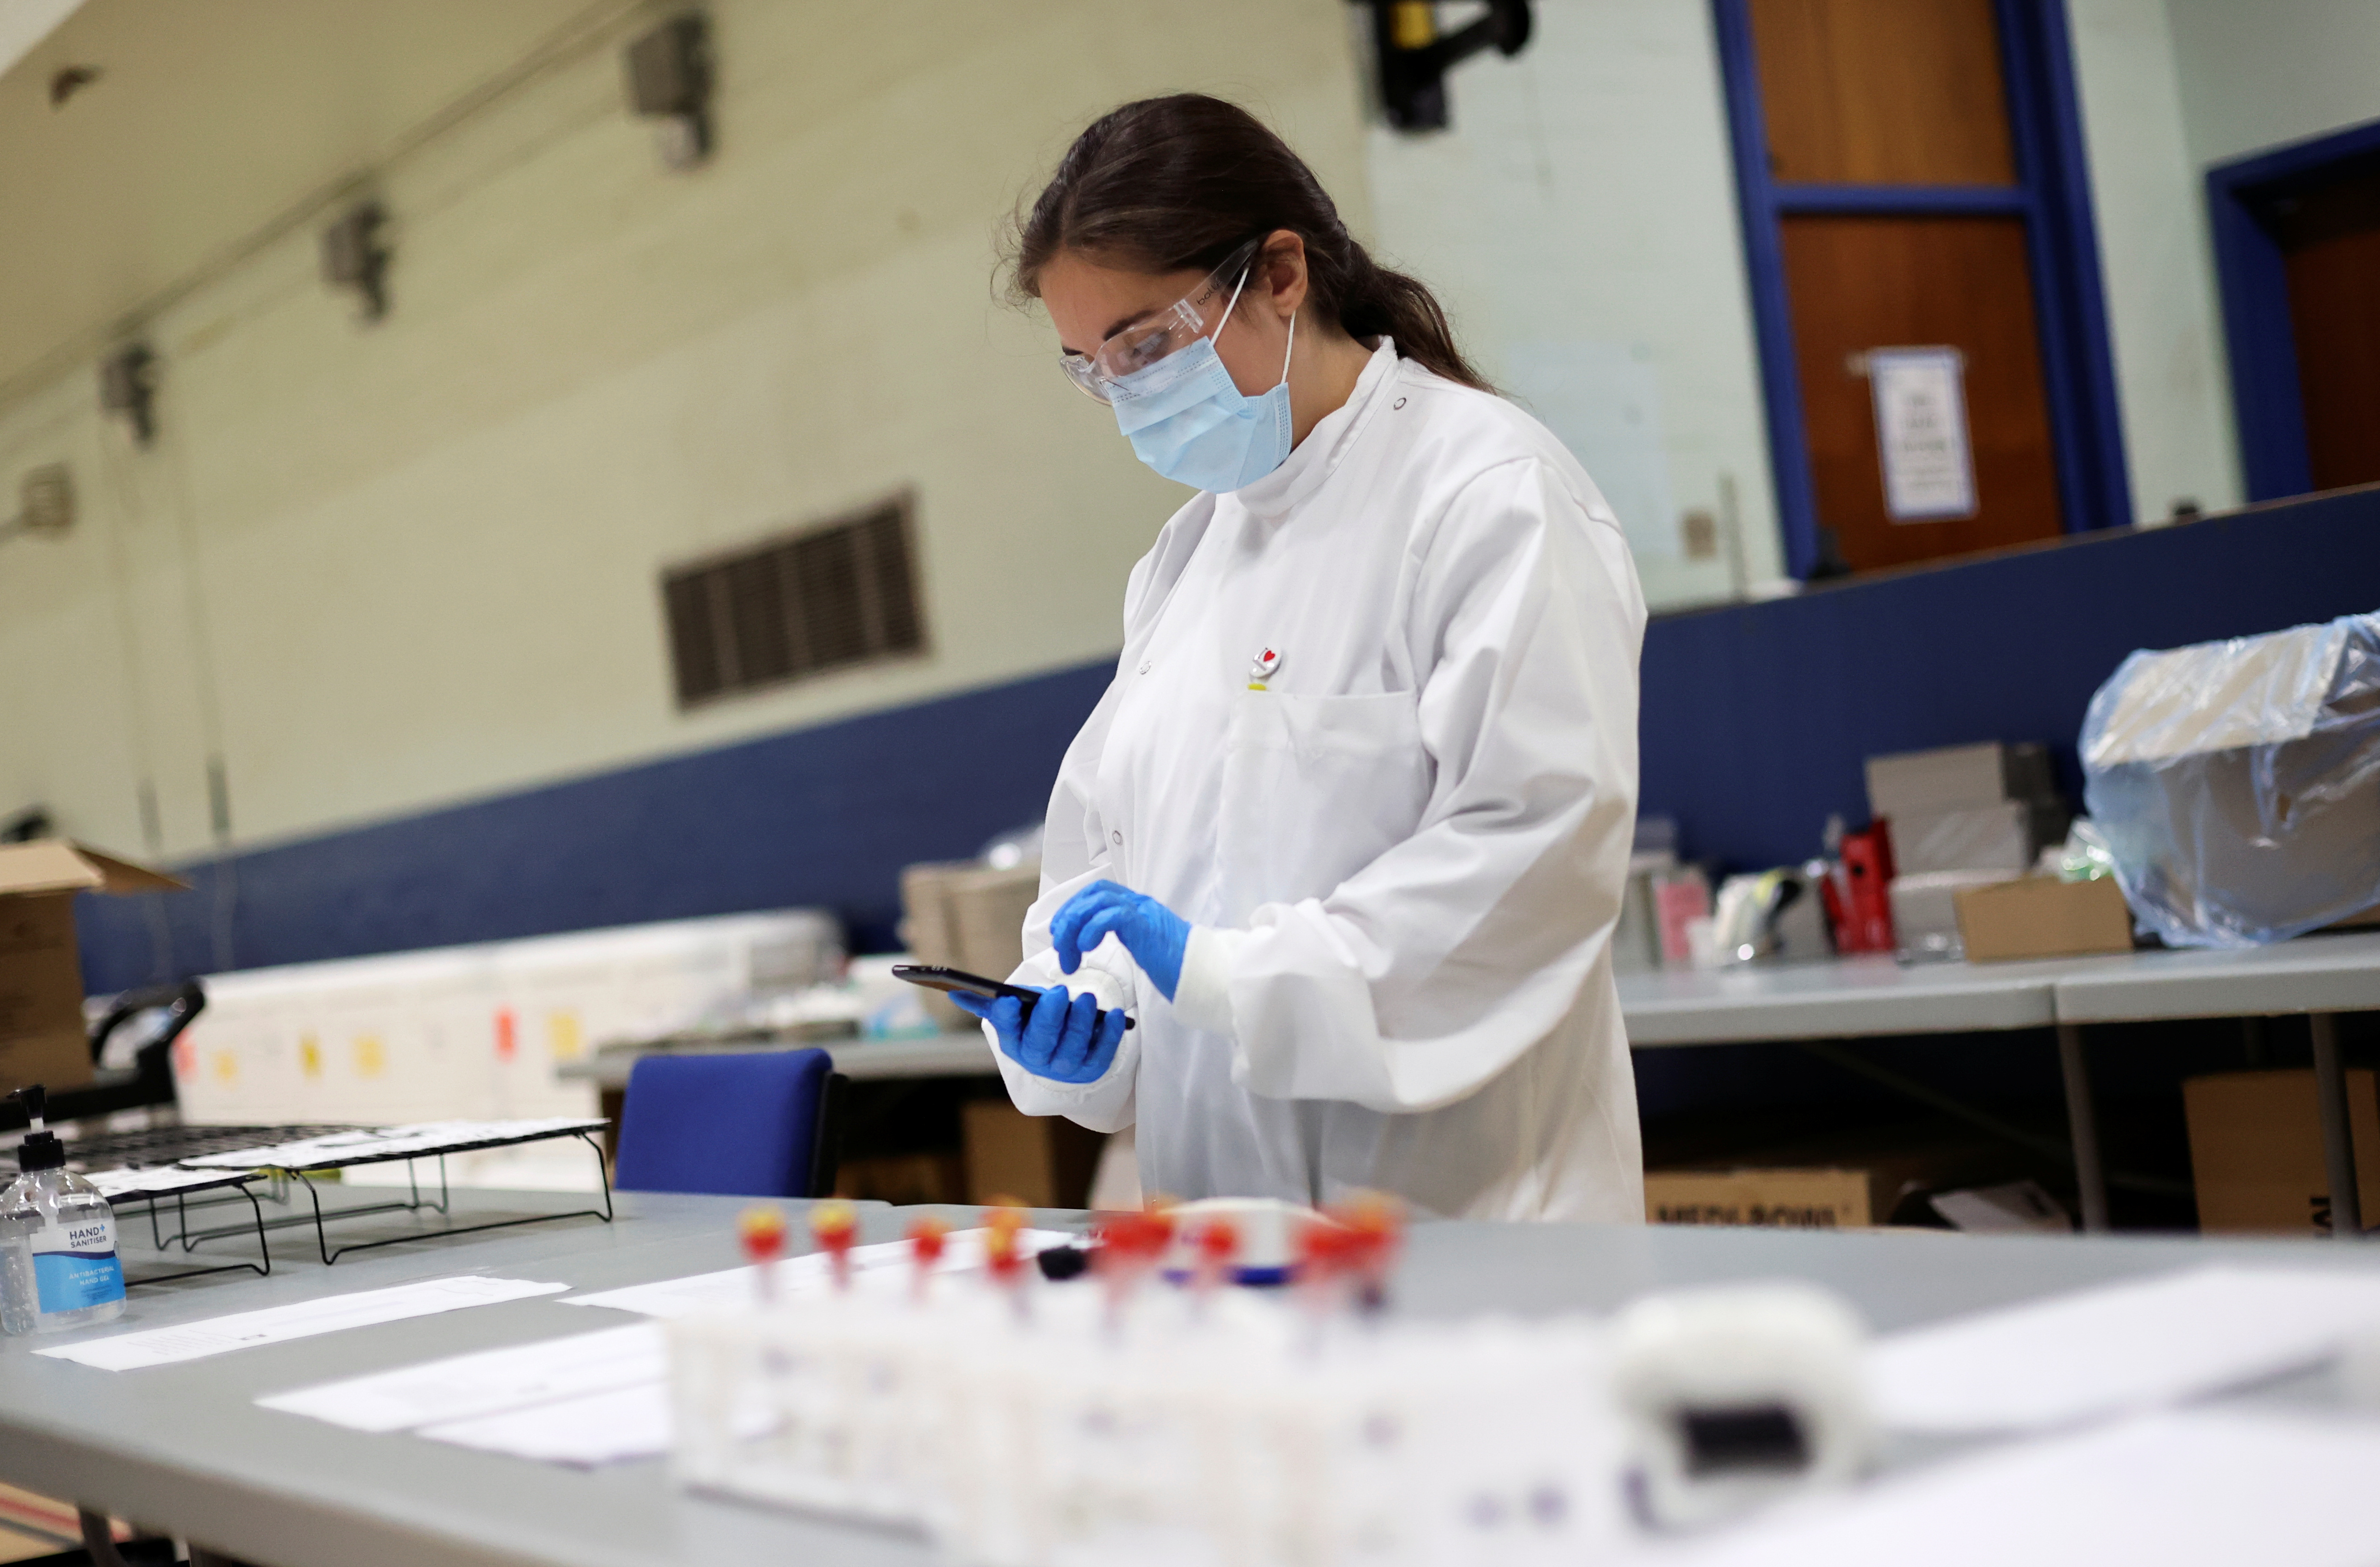 Clinical trial of tests for the coronavirus disease (COVID-19) antibodies, at Keele University